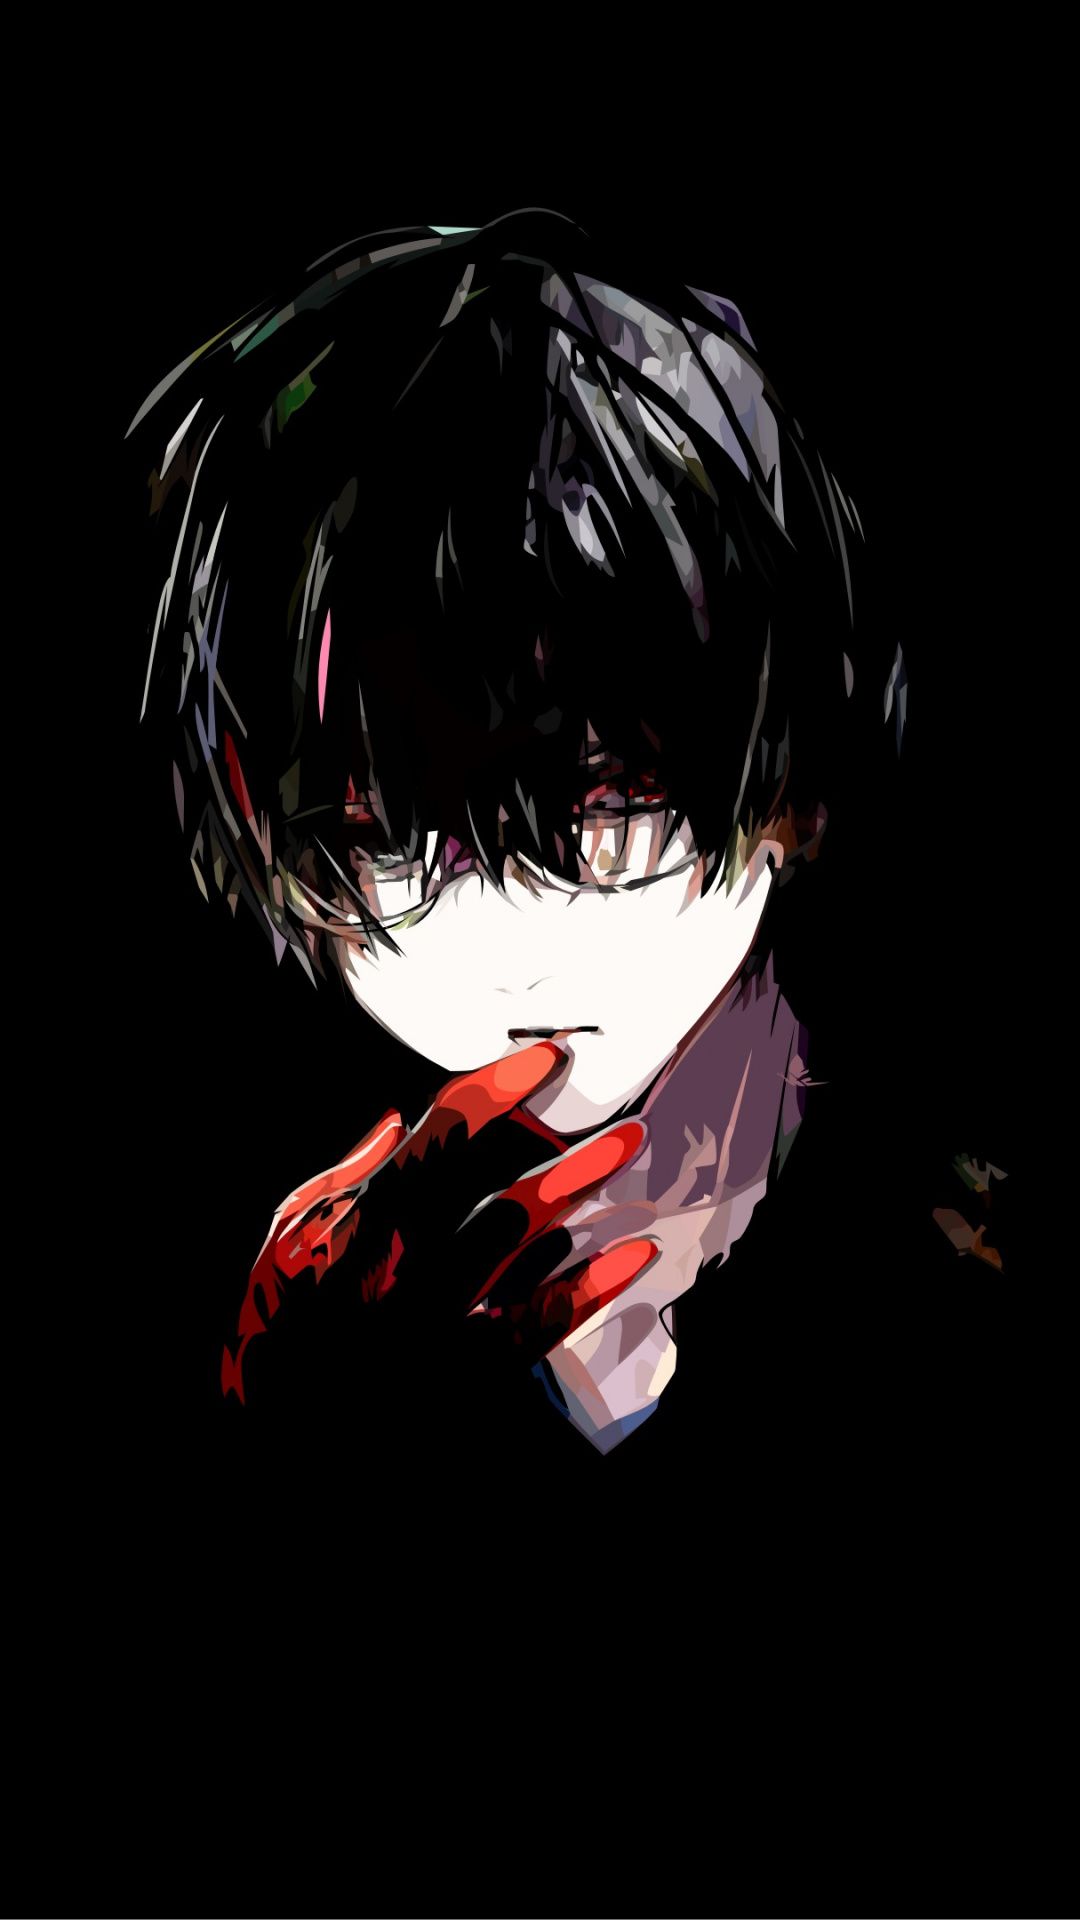 Anime Sad Tokyo Ghoul Wallpapers - Wallpaper Cave